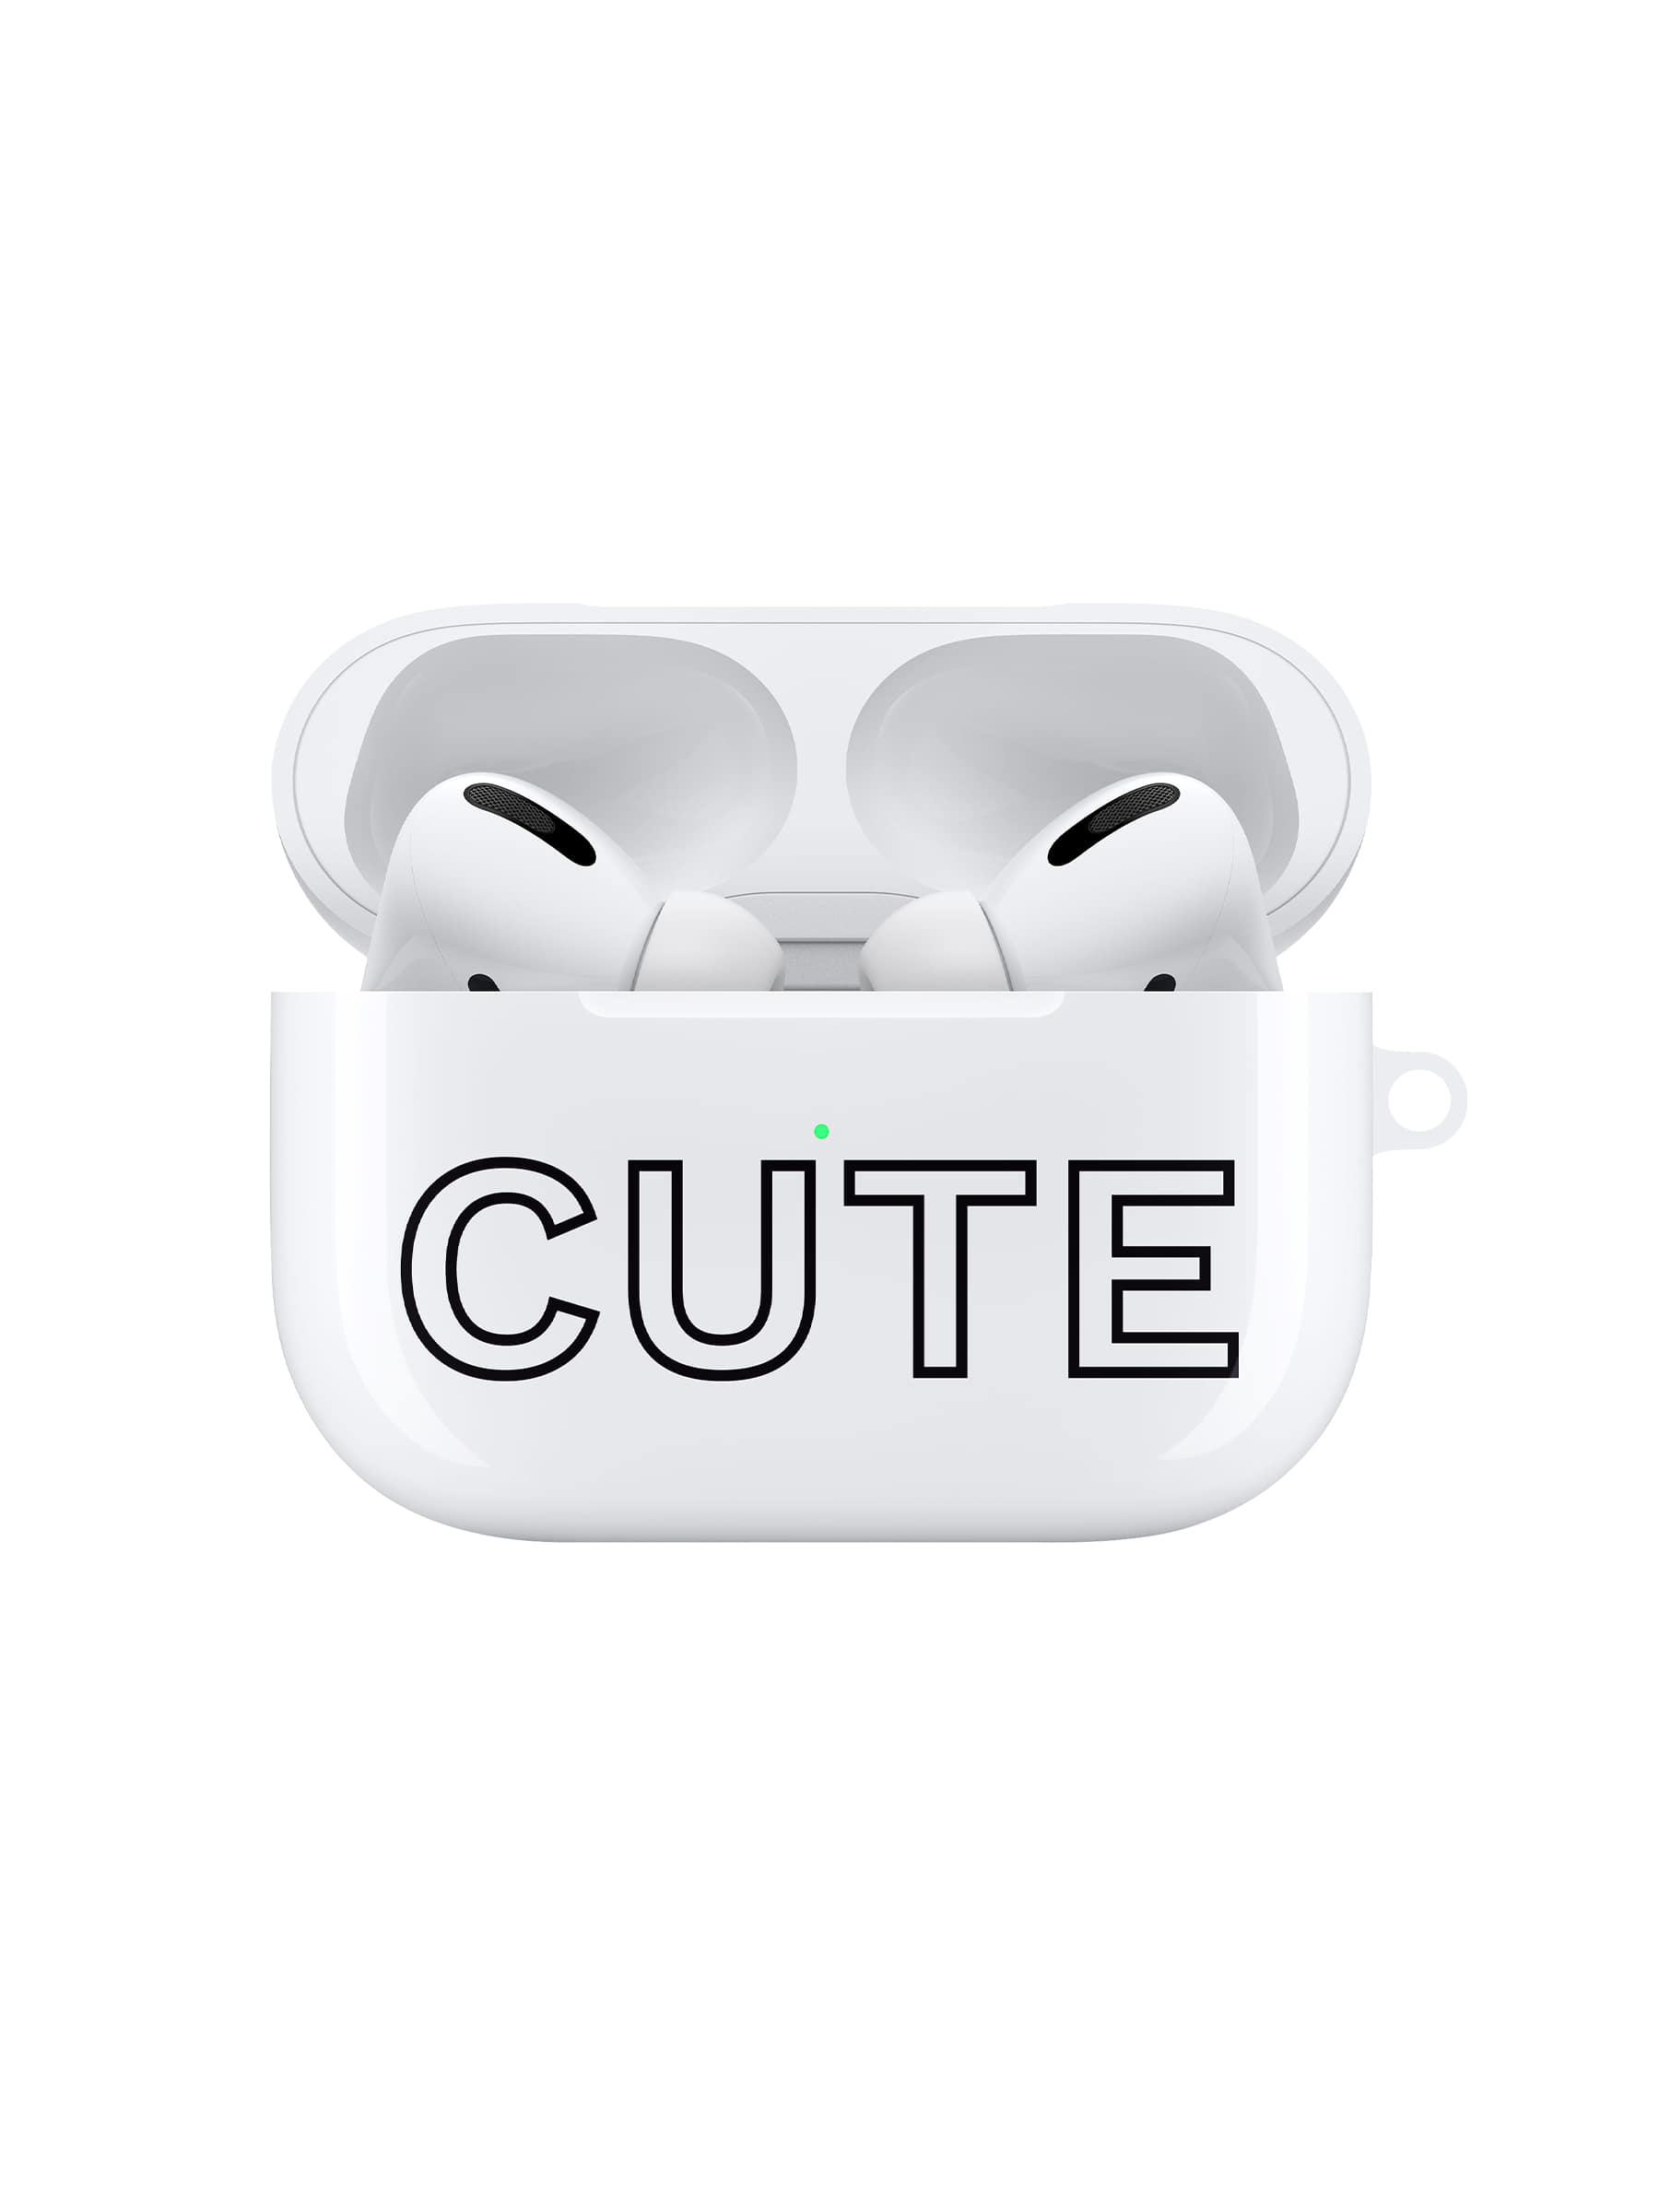 This is mine [ Snow White : AirPods III &amp; Pro ]